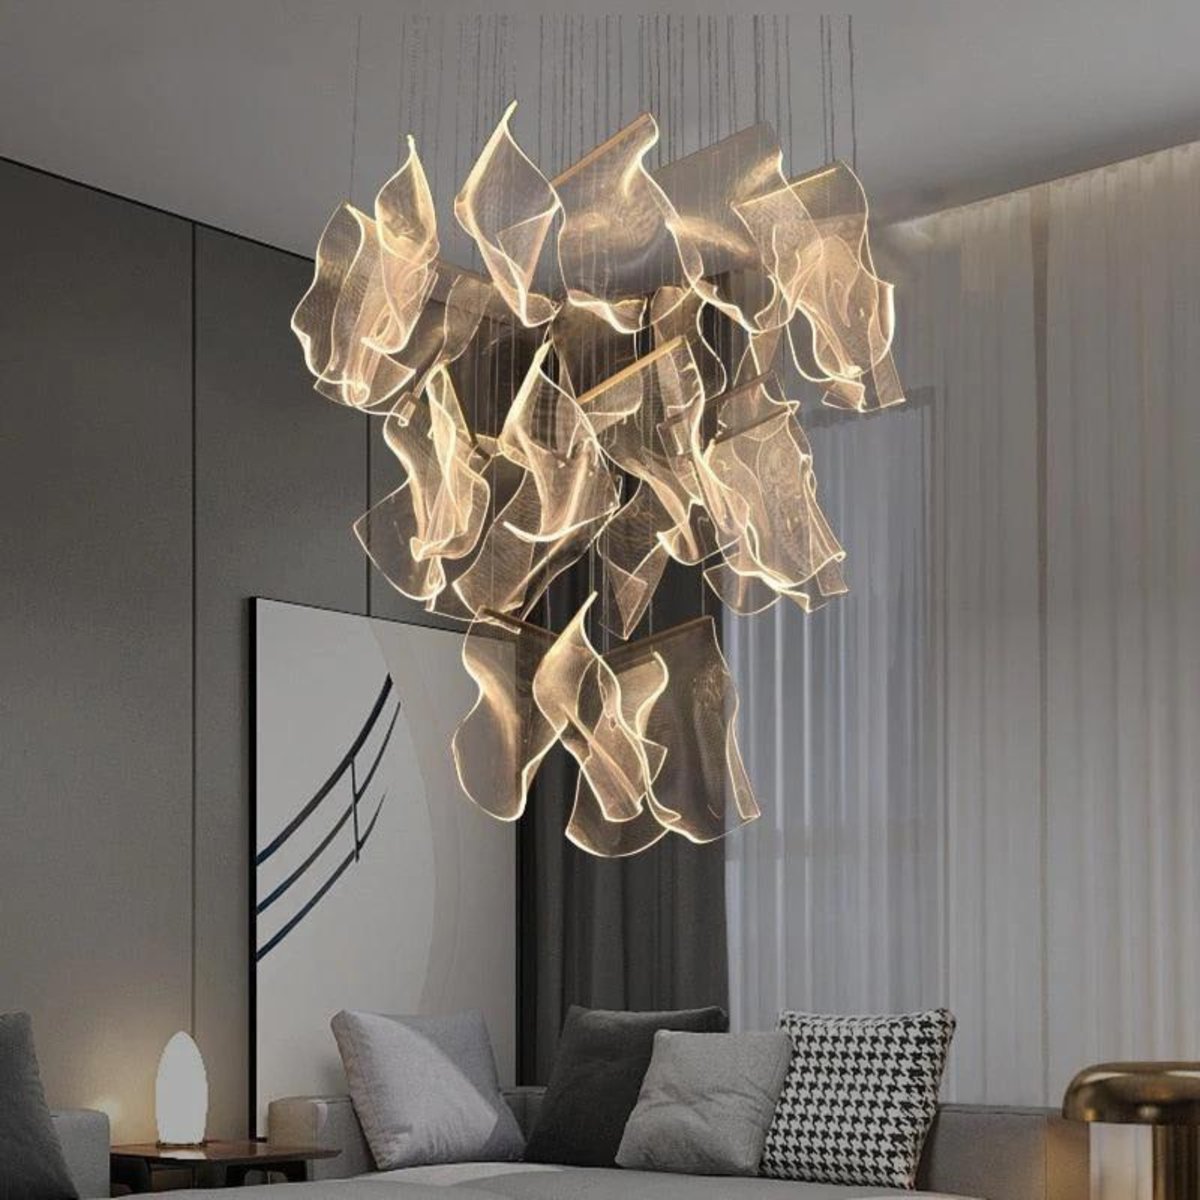 Use the decorative design of this fancy flowing abstract LED pendant to accent your contemporary decor.
------
Shop Now: galastellar.com/products/moder…
.
#pendant #ledpendant #pendantlights #ledlights #decorative #art #artwork #modernart #modernartwork